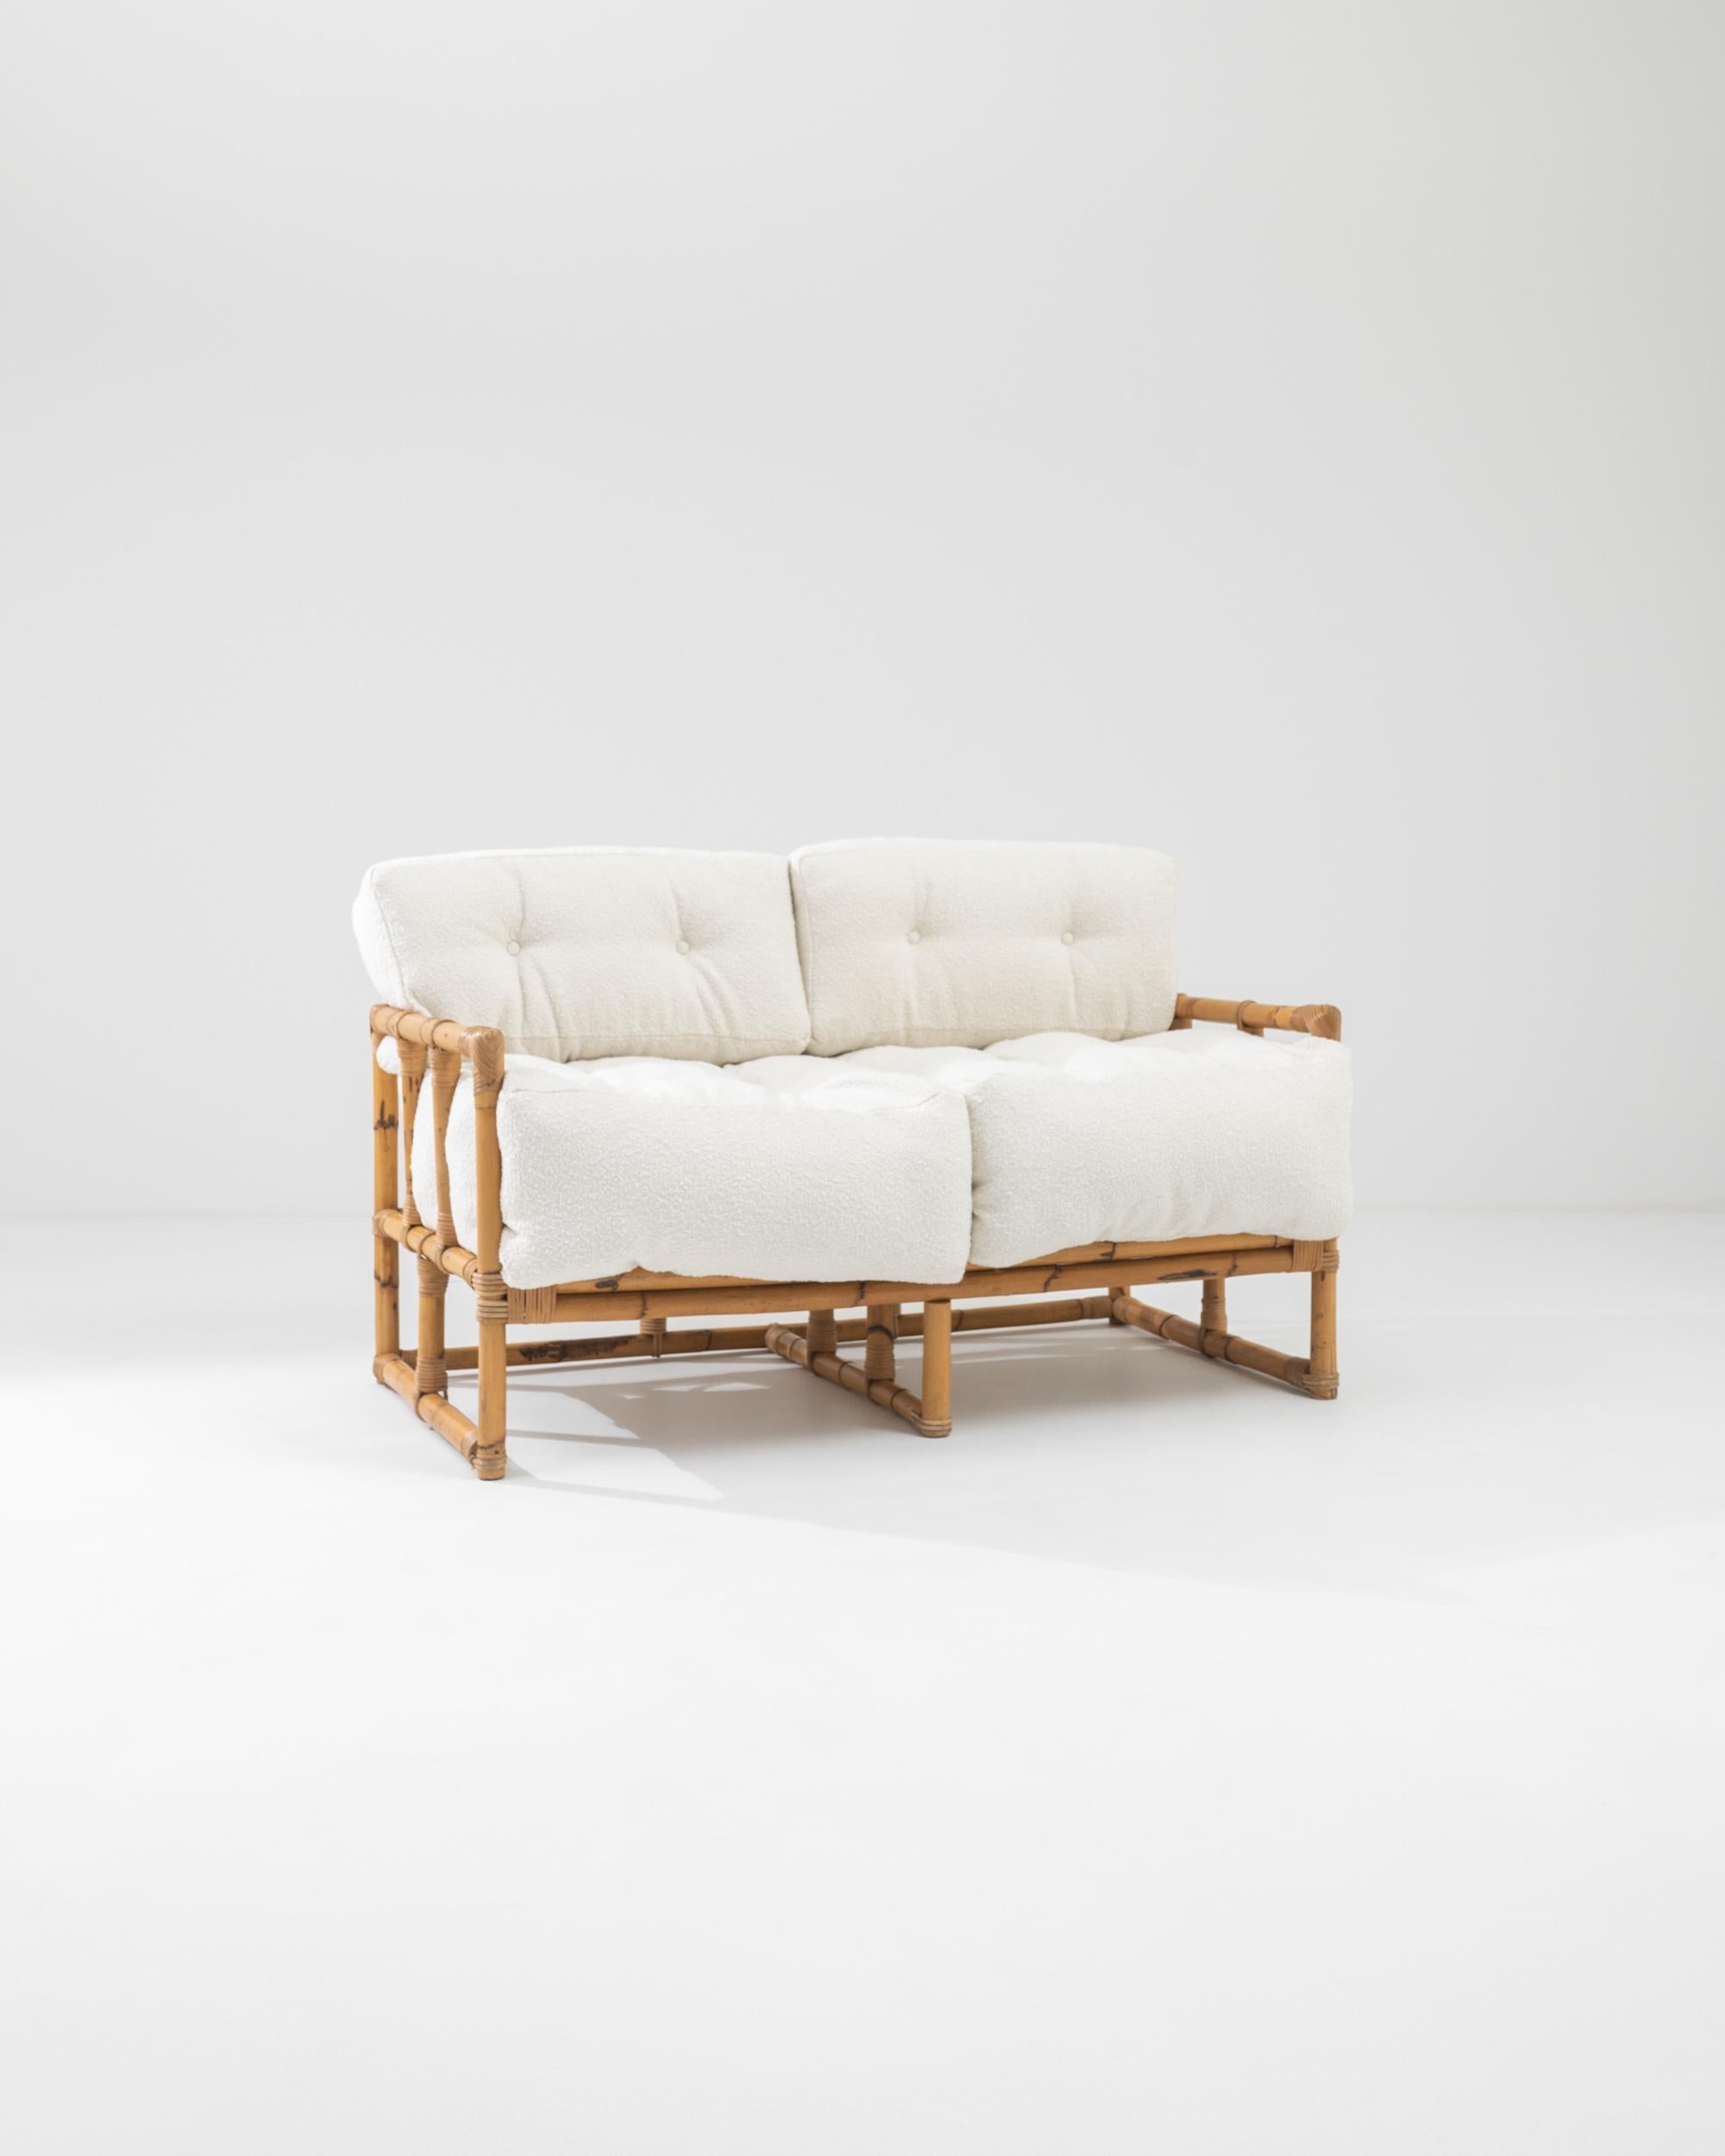 A rattan upholstered sofa made in 20th century France. A creamy off-white boucle upholstery provides vivacious new life to this retro treasure. Paired with an updated fabric, the natural material emits an aura of calm, the pleasing synergy inviting